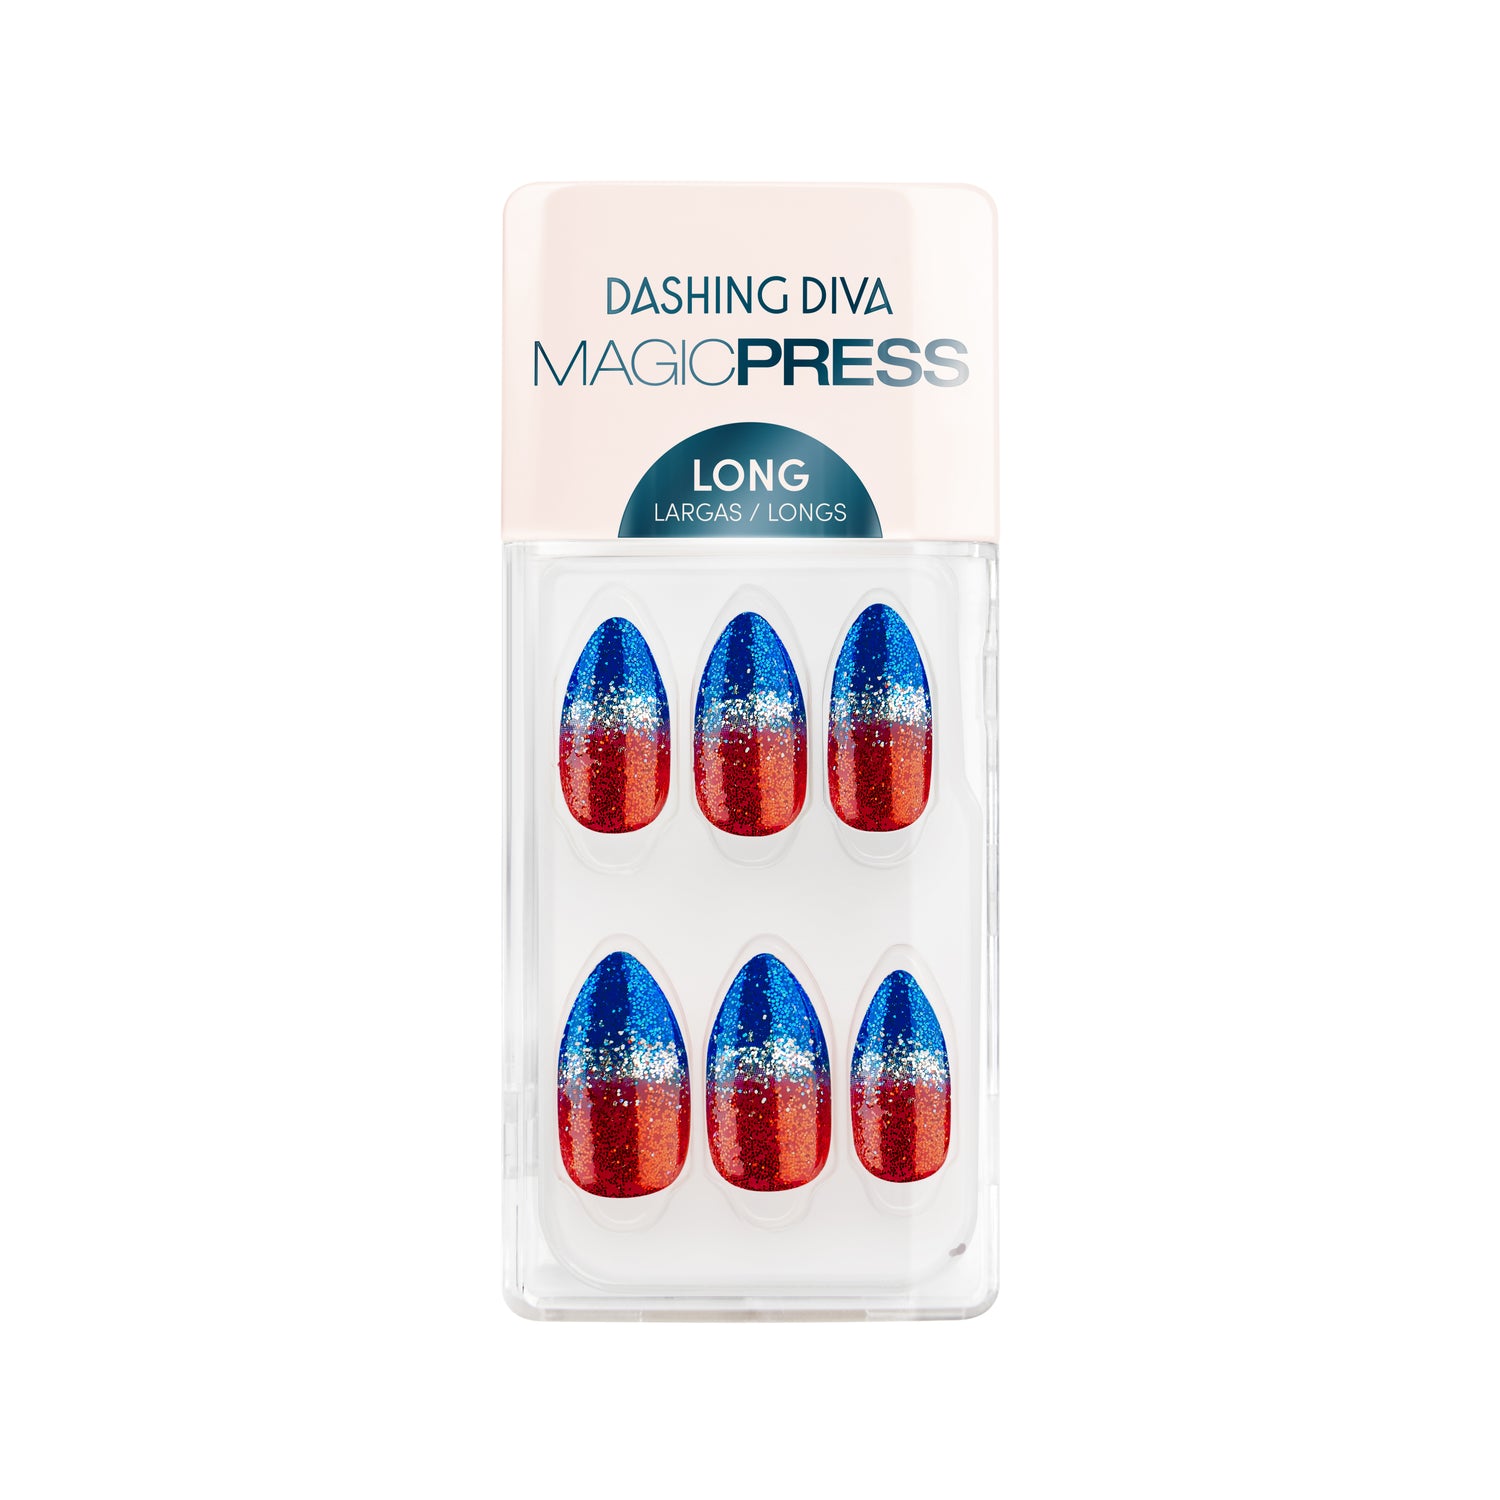 Dashing Diva Magic Press stiletto red white and blue sparkly metallic 4th of July false press on nails.